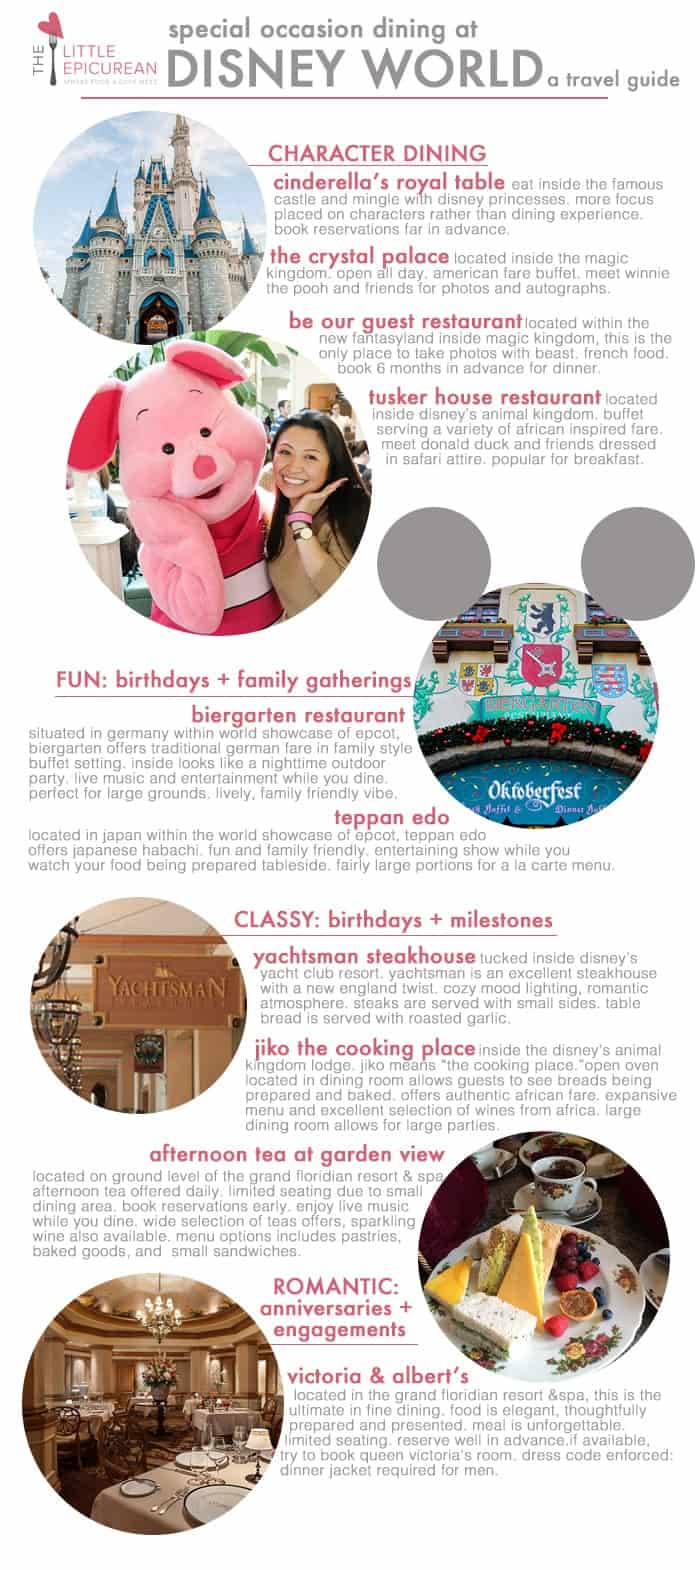 Disney World Special Occasion Dining Guide